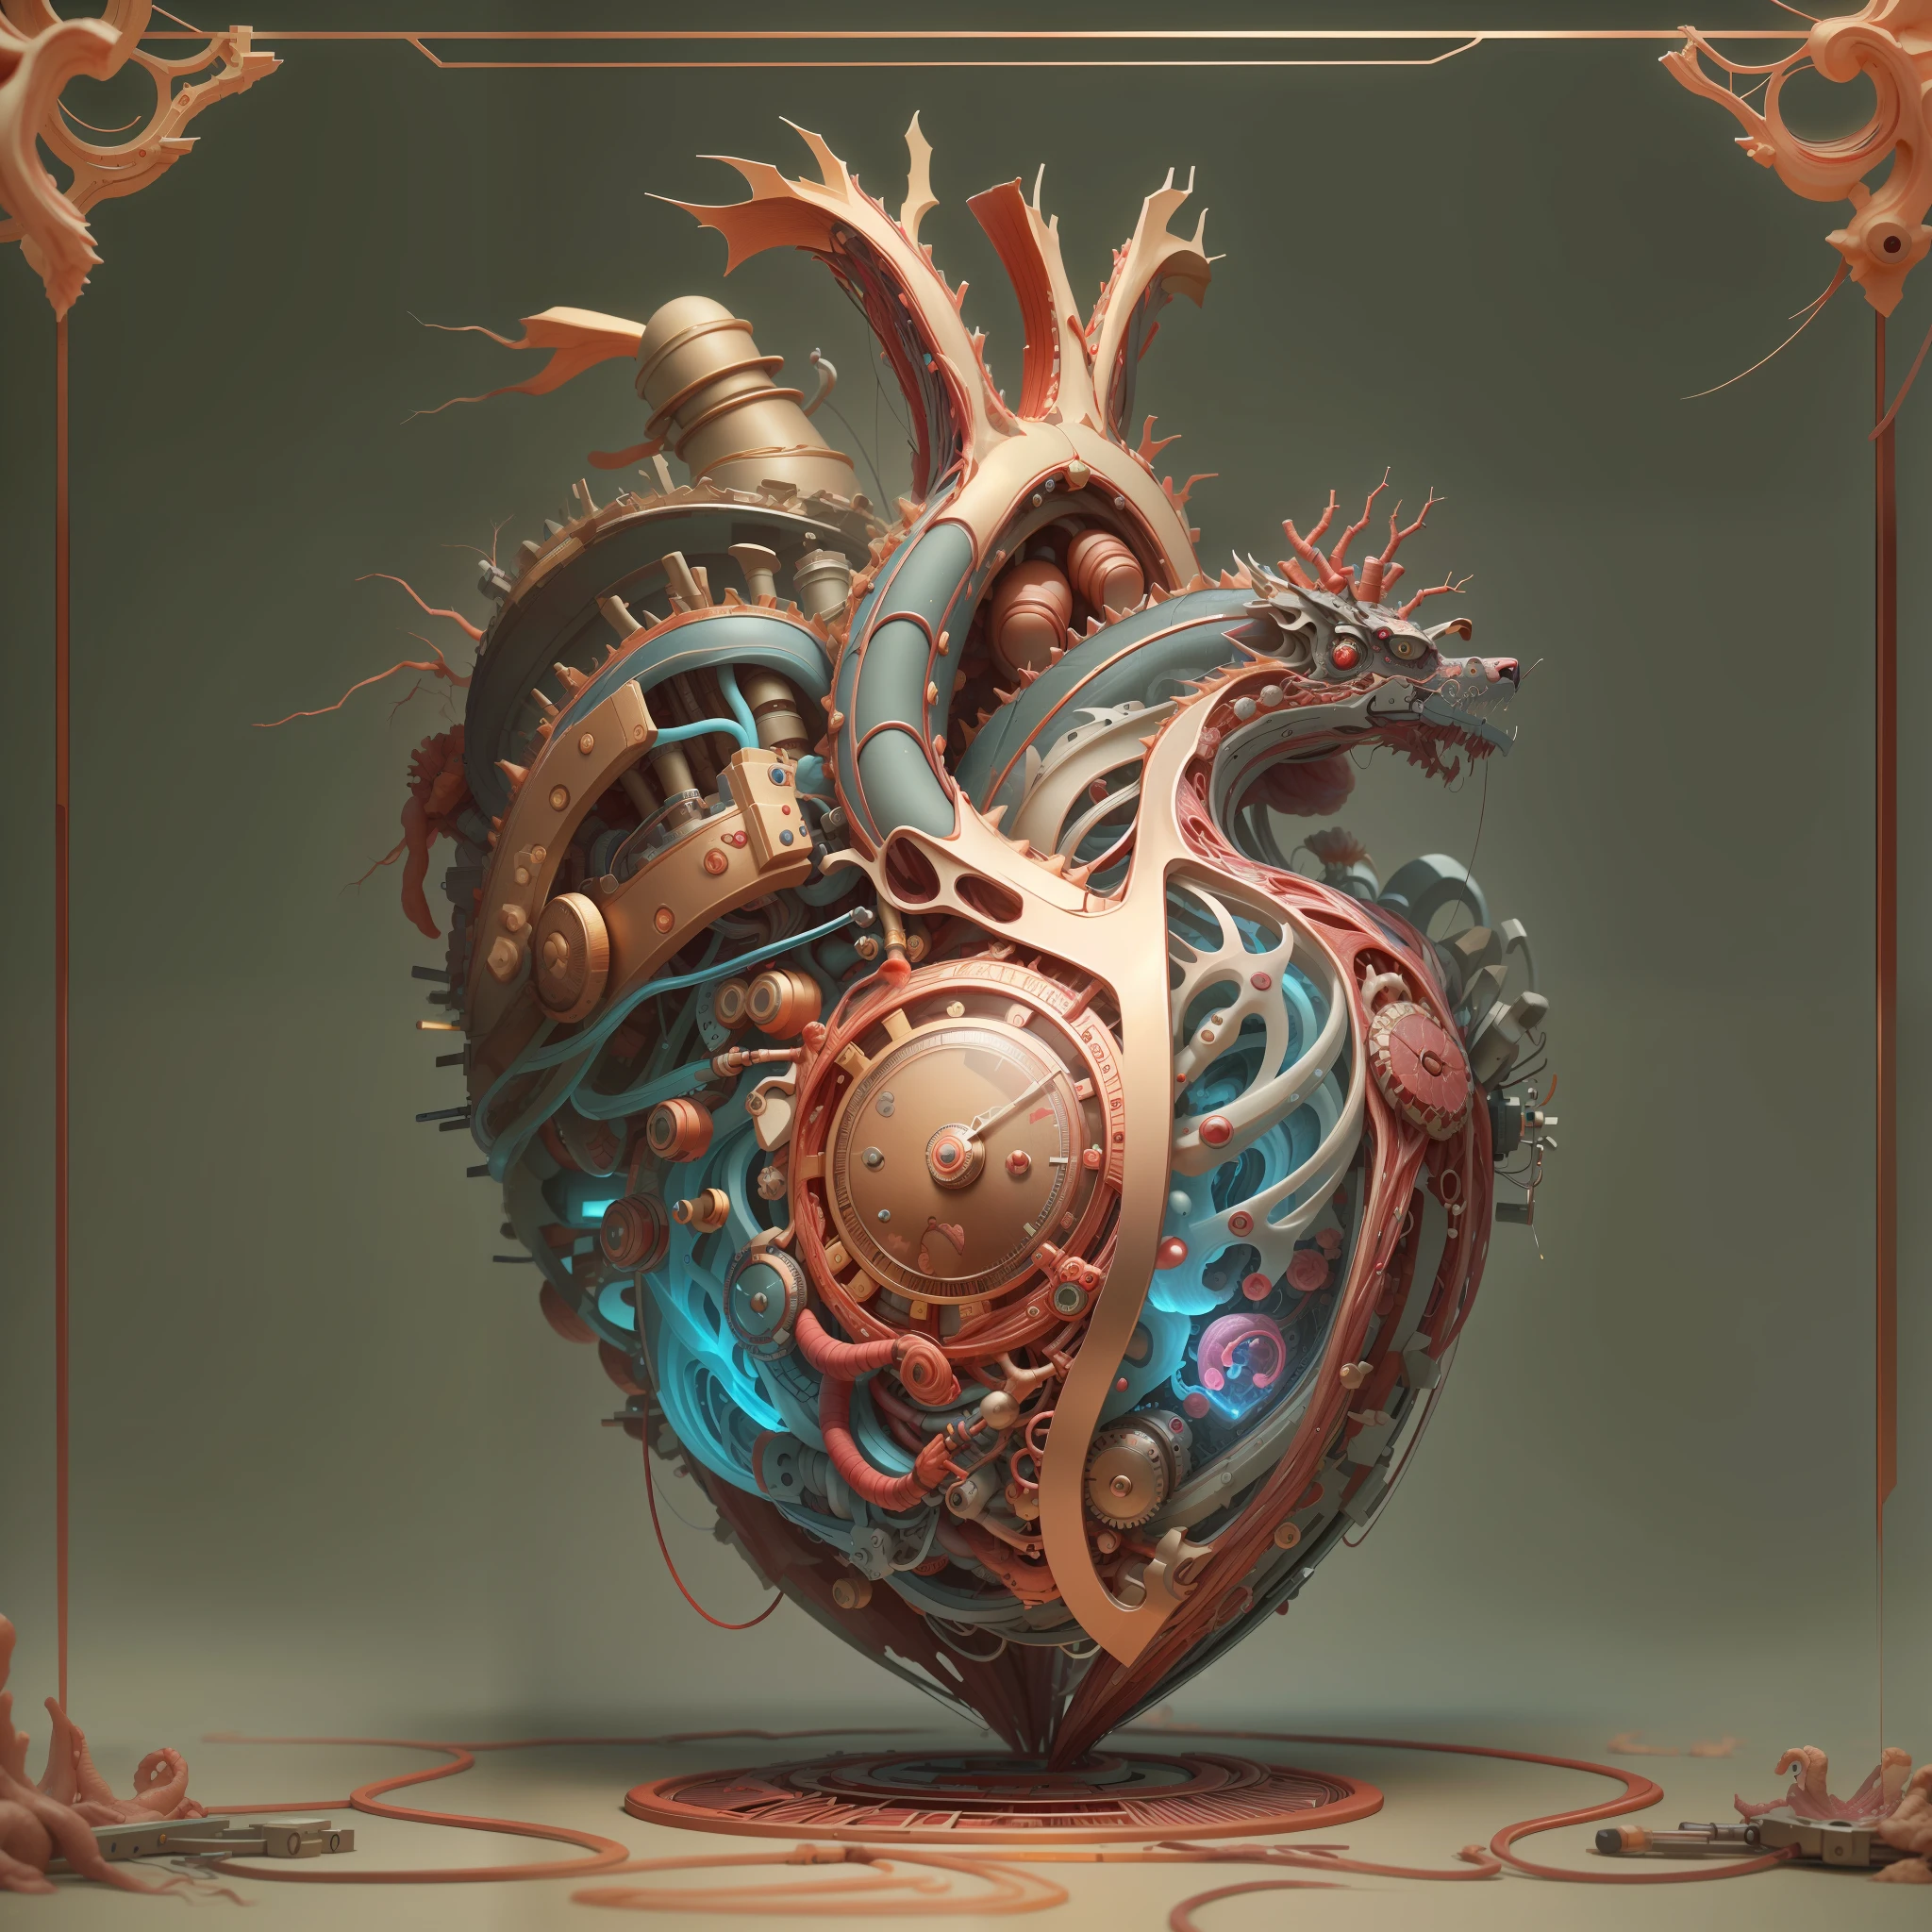 best qualtiy，tmasterpiece，Ultra-high resolution，（realisticlying：1.4），absurderes，intriguing，High color saturation，1 heart，3D Anatomy，Glow-emitting pulsating veins，sci-fy，3D mechanical biological heart， fanciful，Beautiful 3D human heart decoration design，hisui/Gold and Copper/The golden dragon/Mechanical dial/Embedded in the heart of a living creature，BiopunkAI